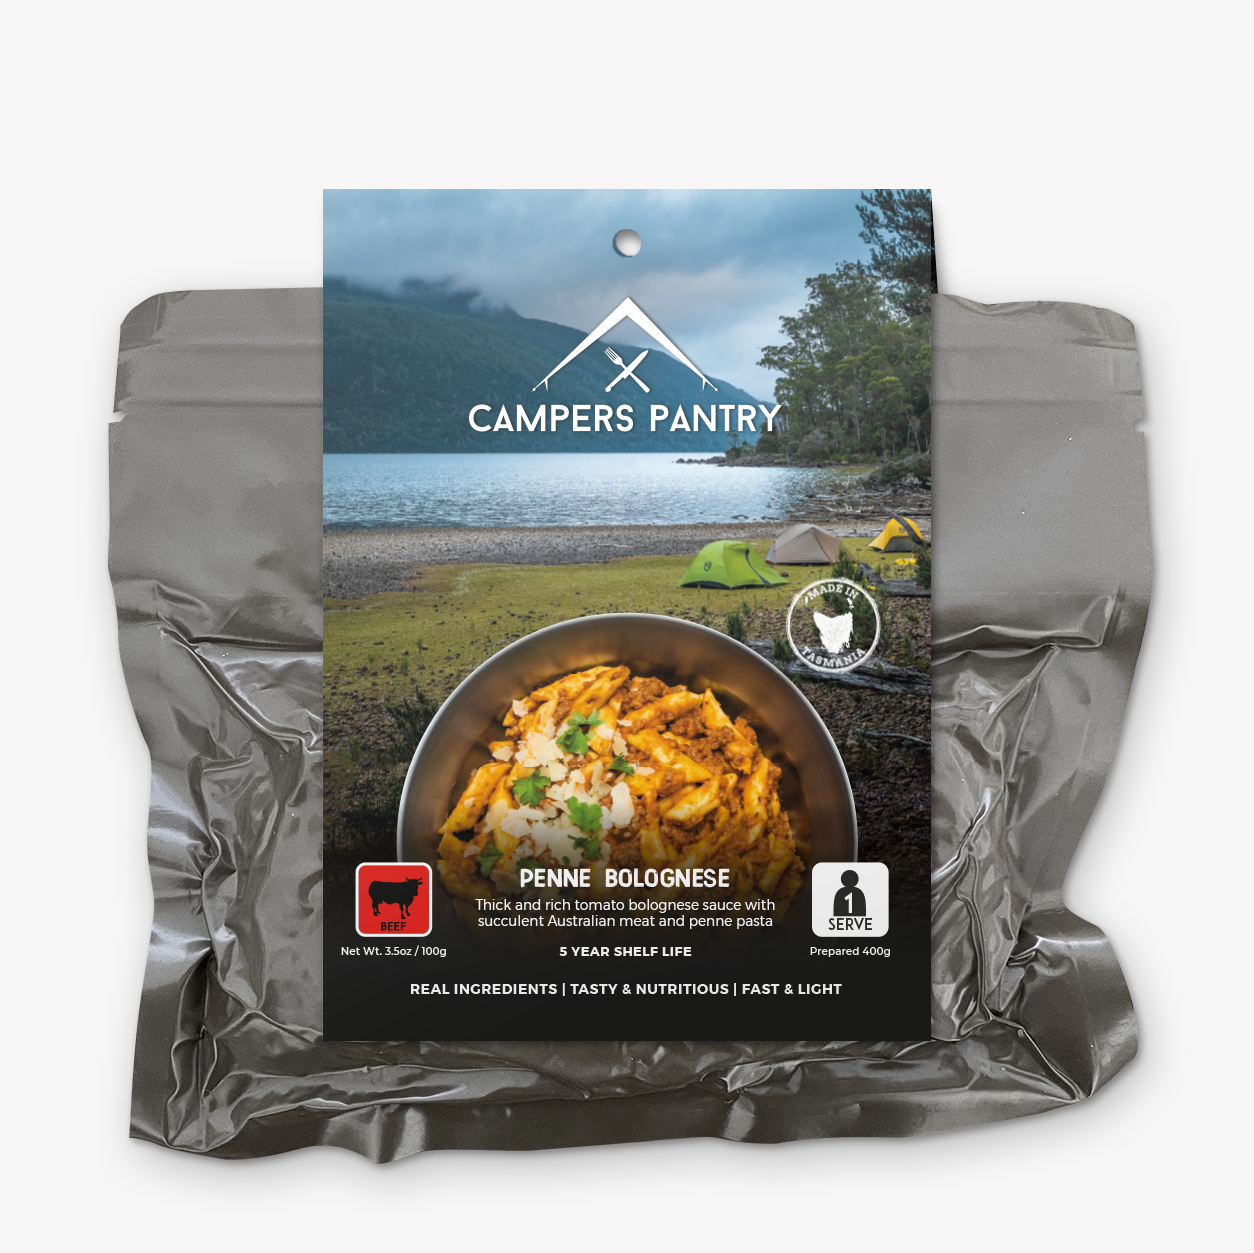 Campers Pantry Penne Bolognese - Expedition Edition